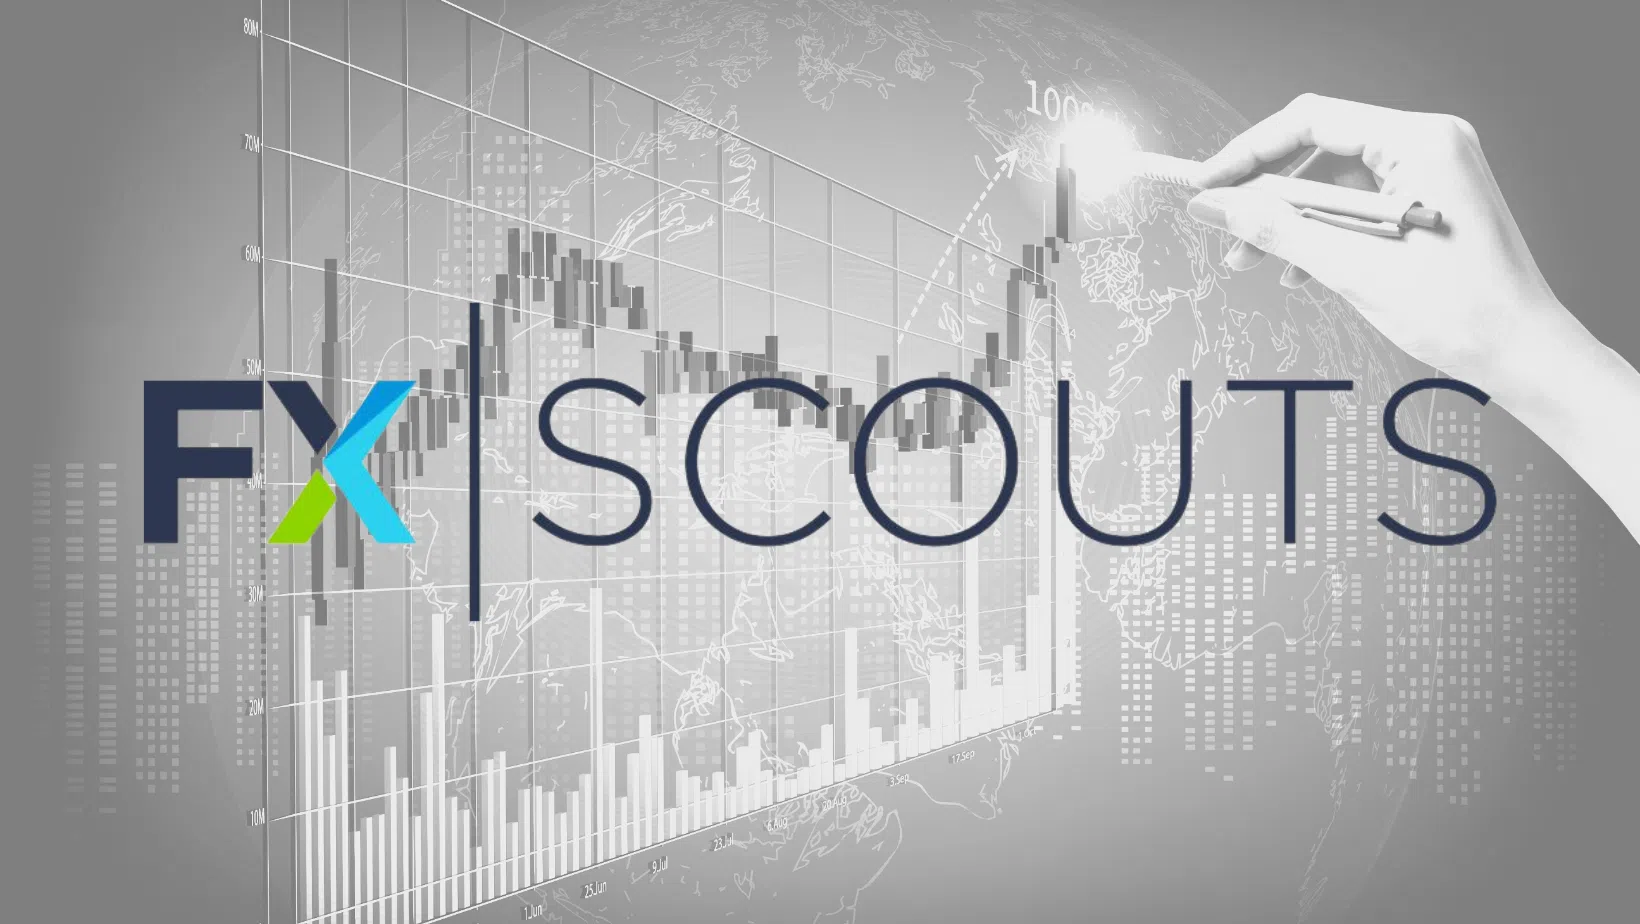 FX-Australia and FX India rebrand as FxScouts, aligning with the global FxScouts brand